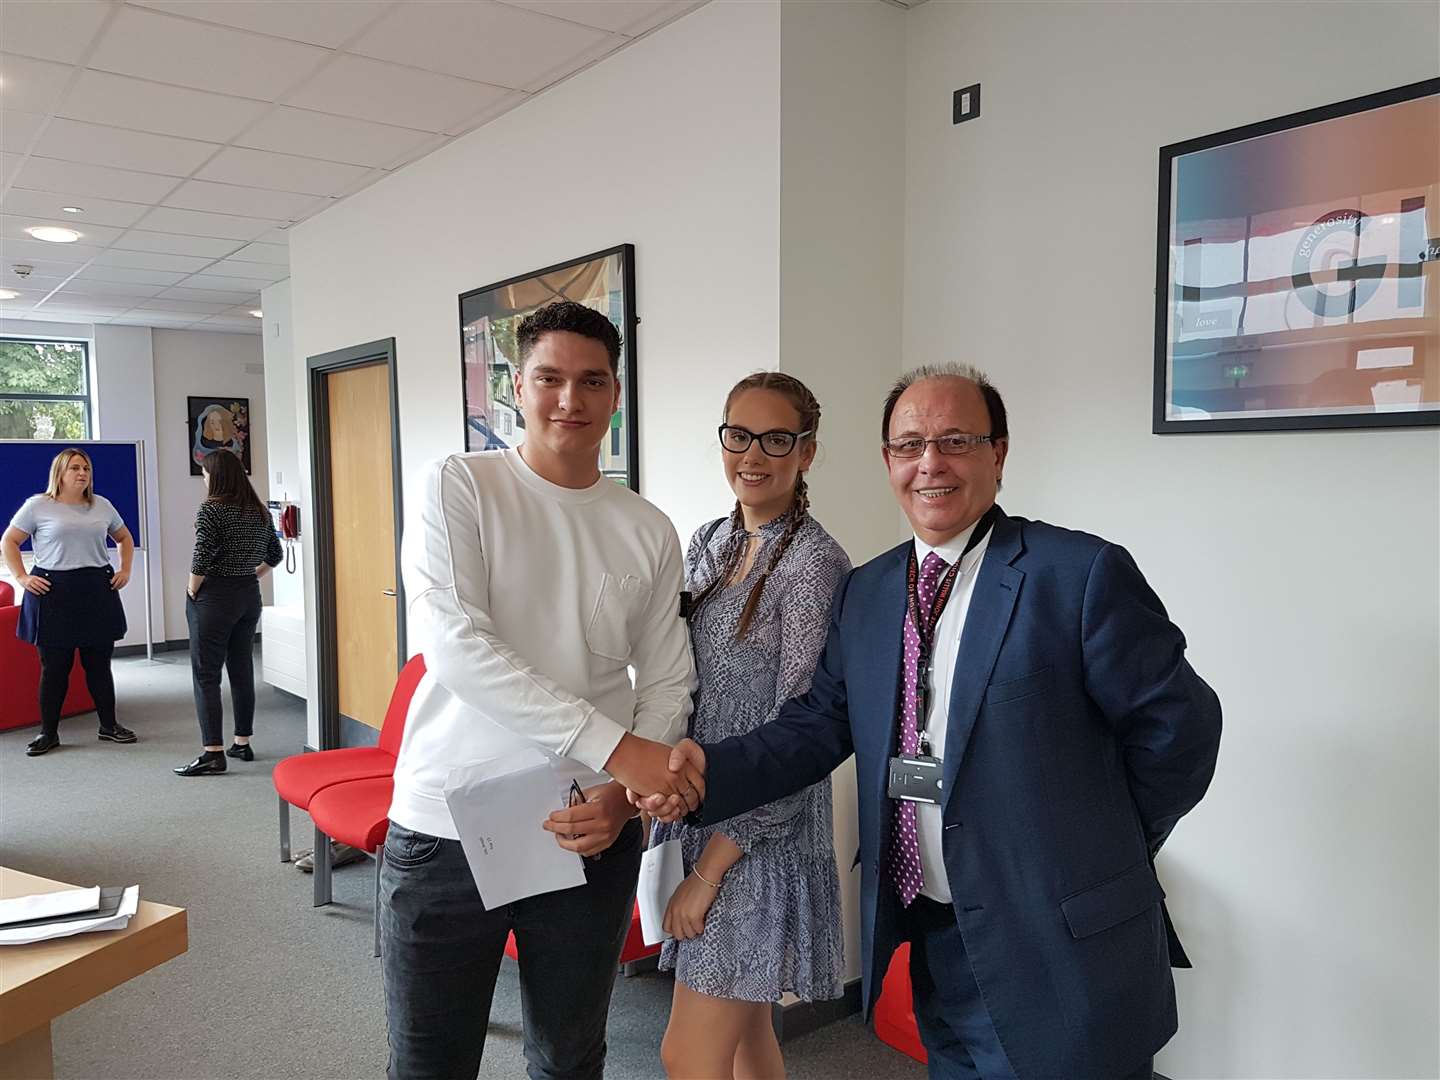 Twins Joe and Millie Lee were congratulated by The John Wallis Church of England Academy's principal, John McParland, after receiving great A-level results (15281540)